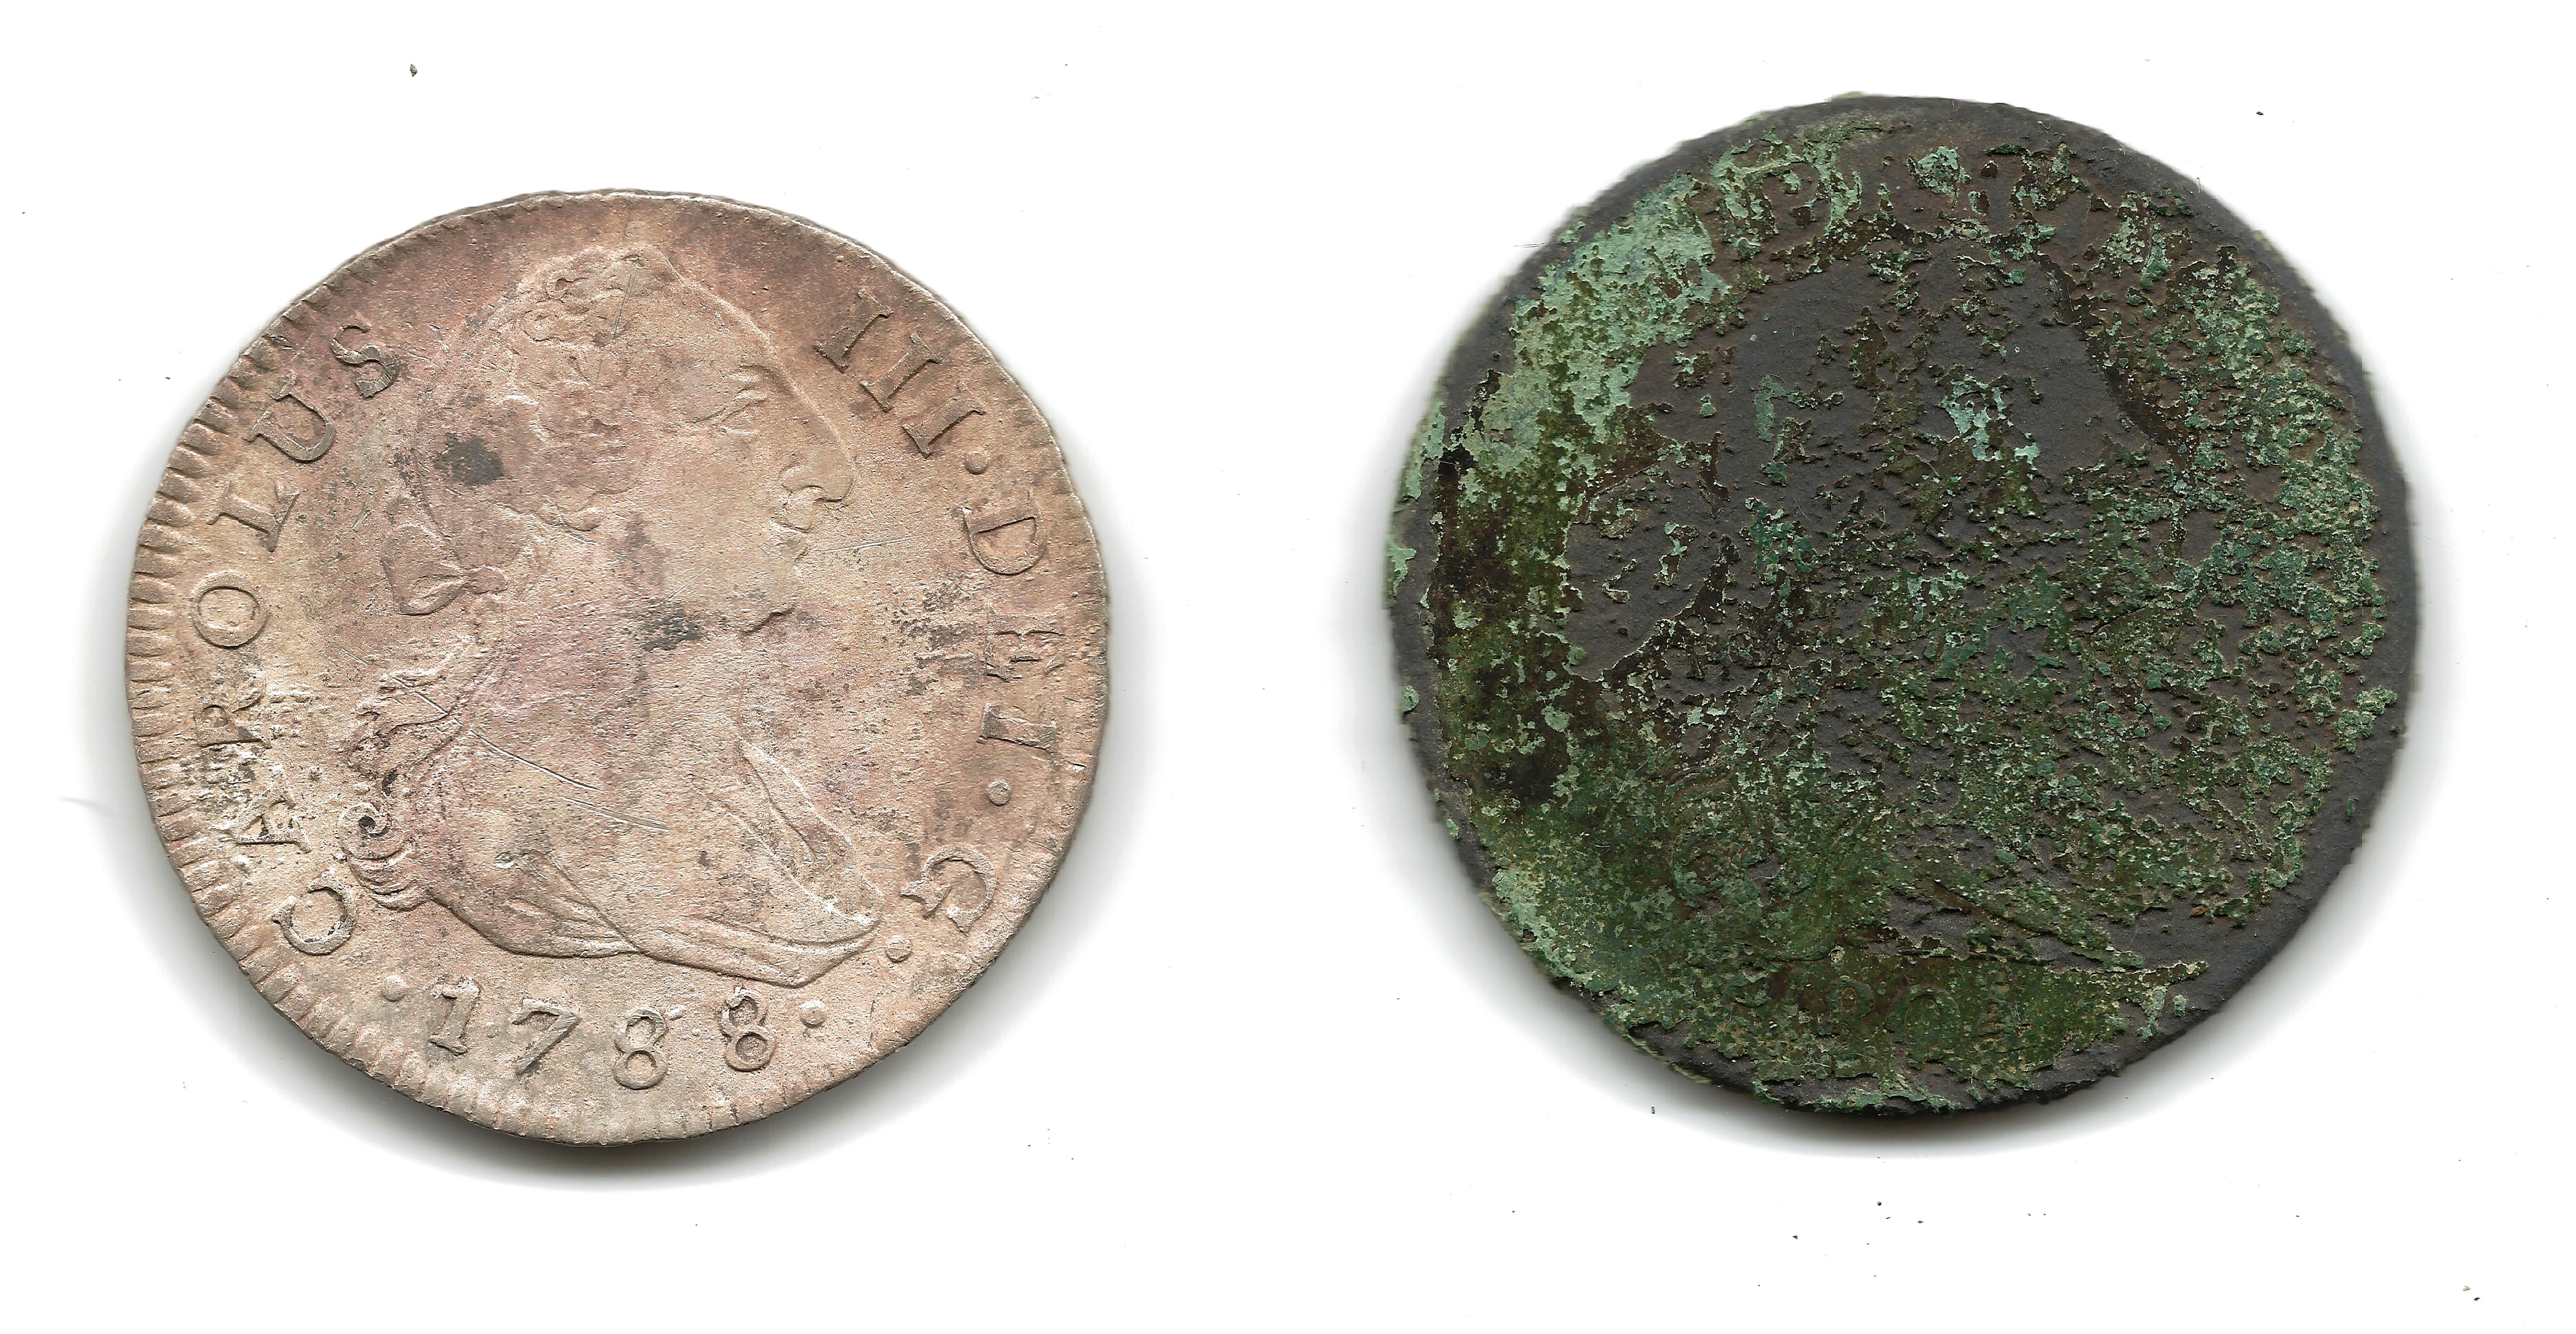 1804 cent & 2 reale obv